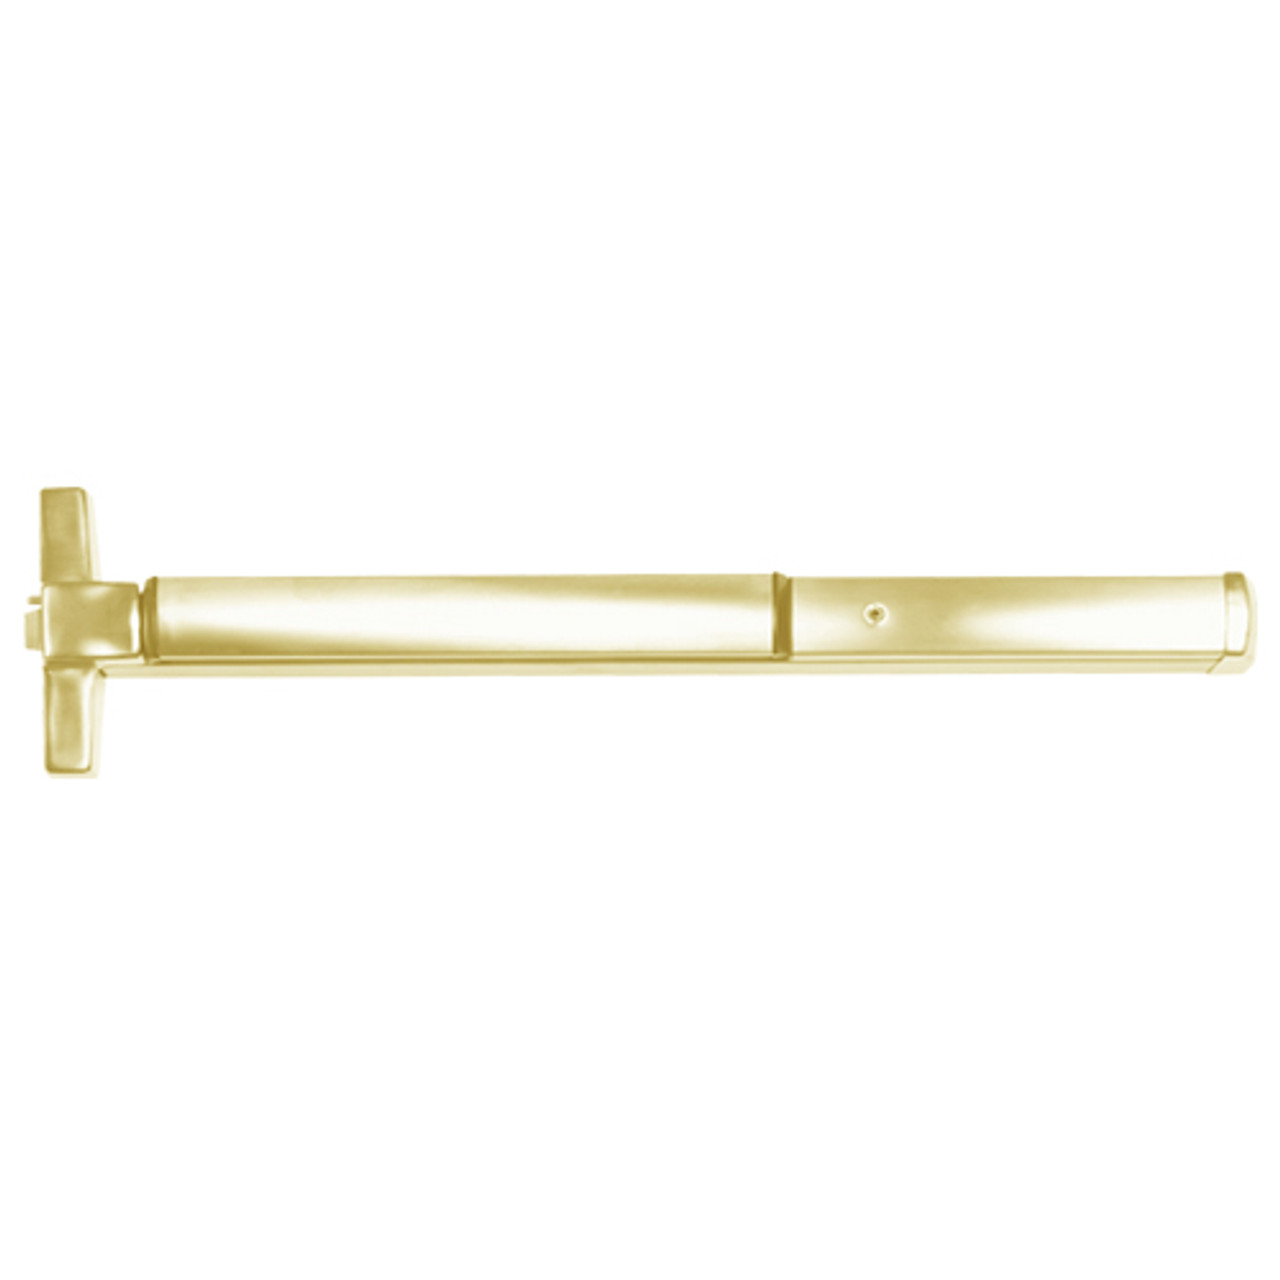 ED4200-606-W048-M61 Corbin ED4200 Series Non Fire Rated Rim Exit Device with Exit Alarm Device in Satin Brass Finish